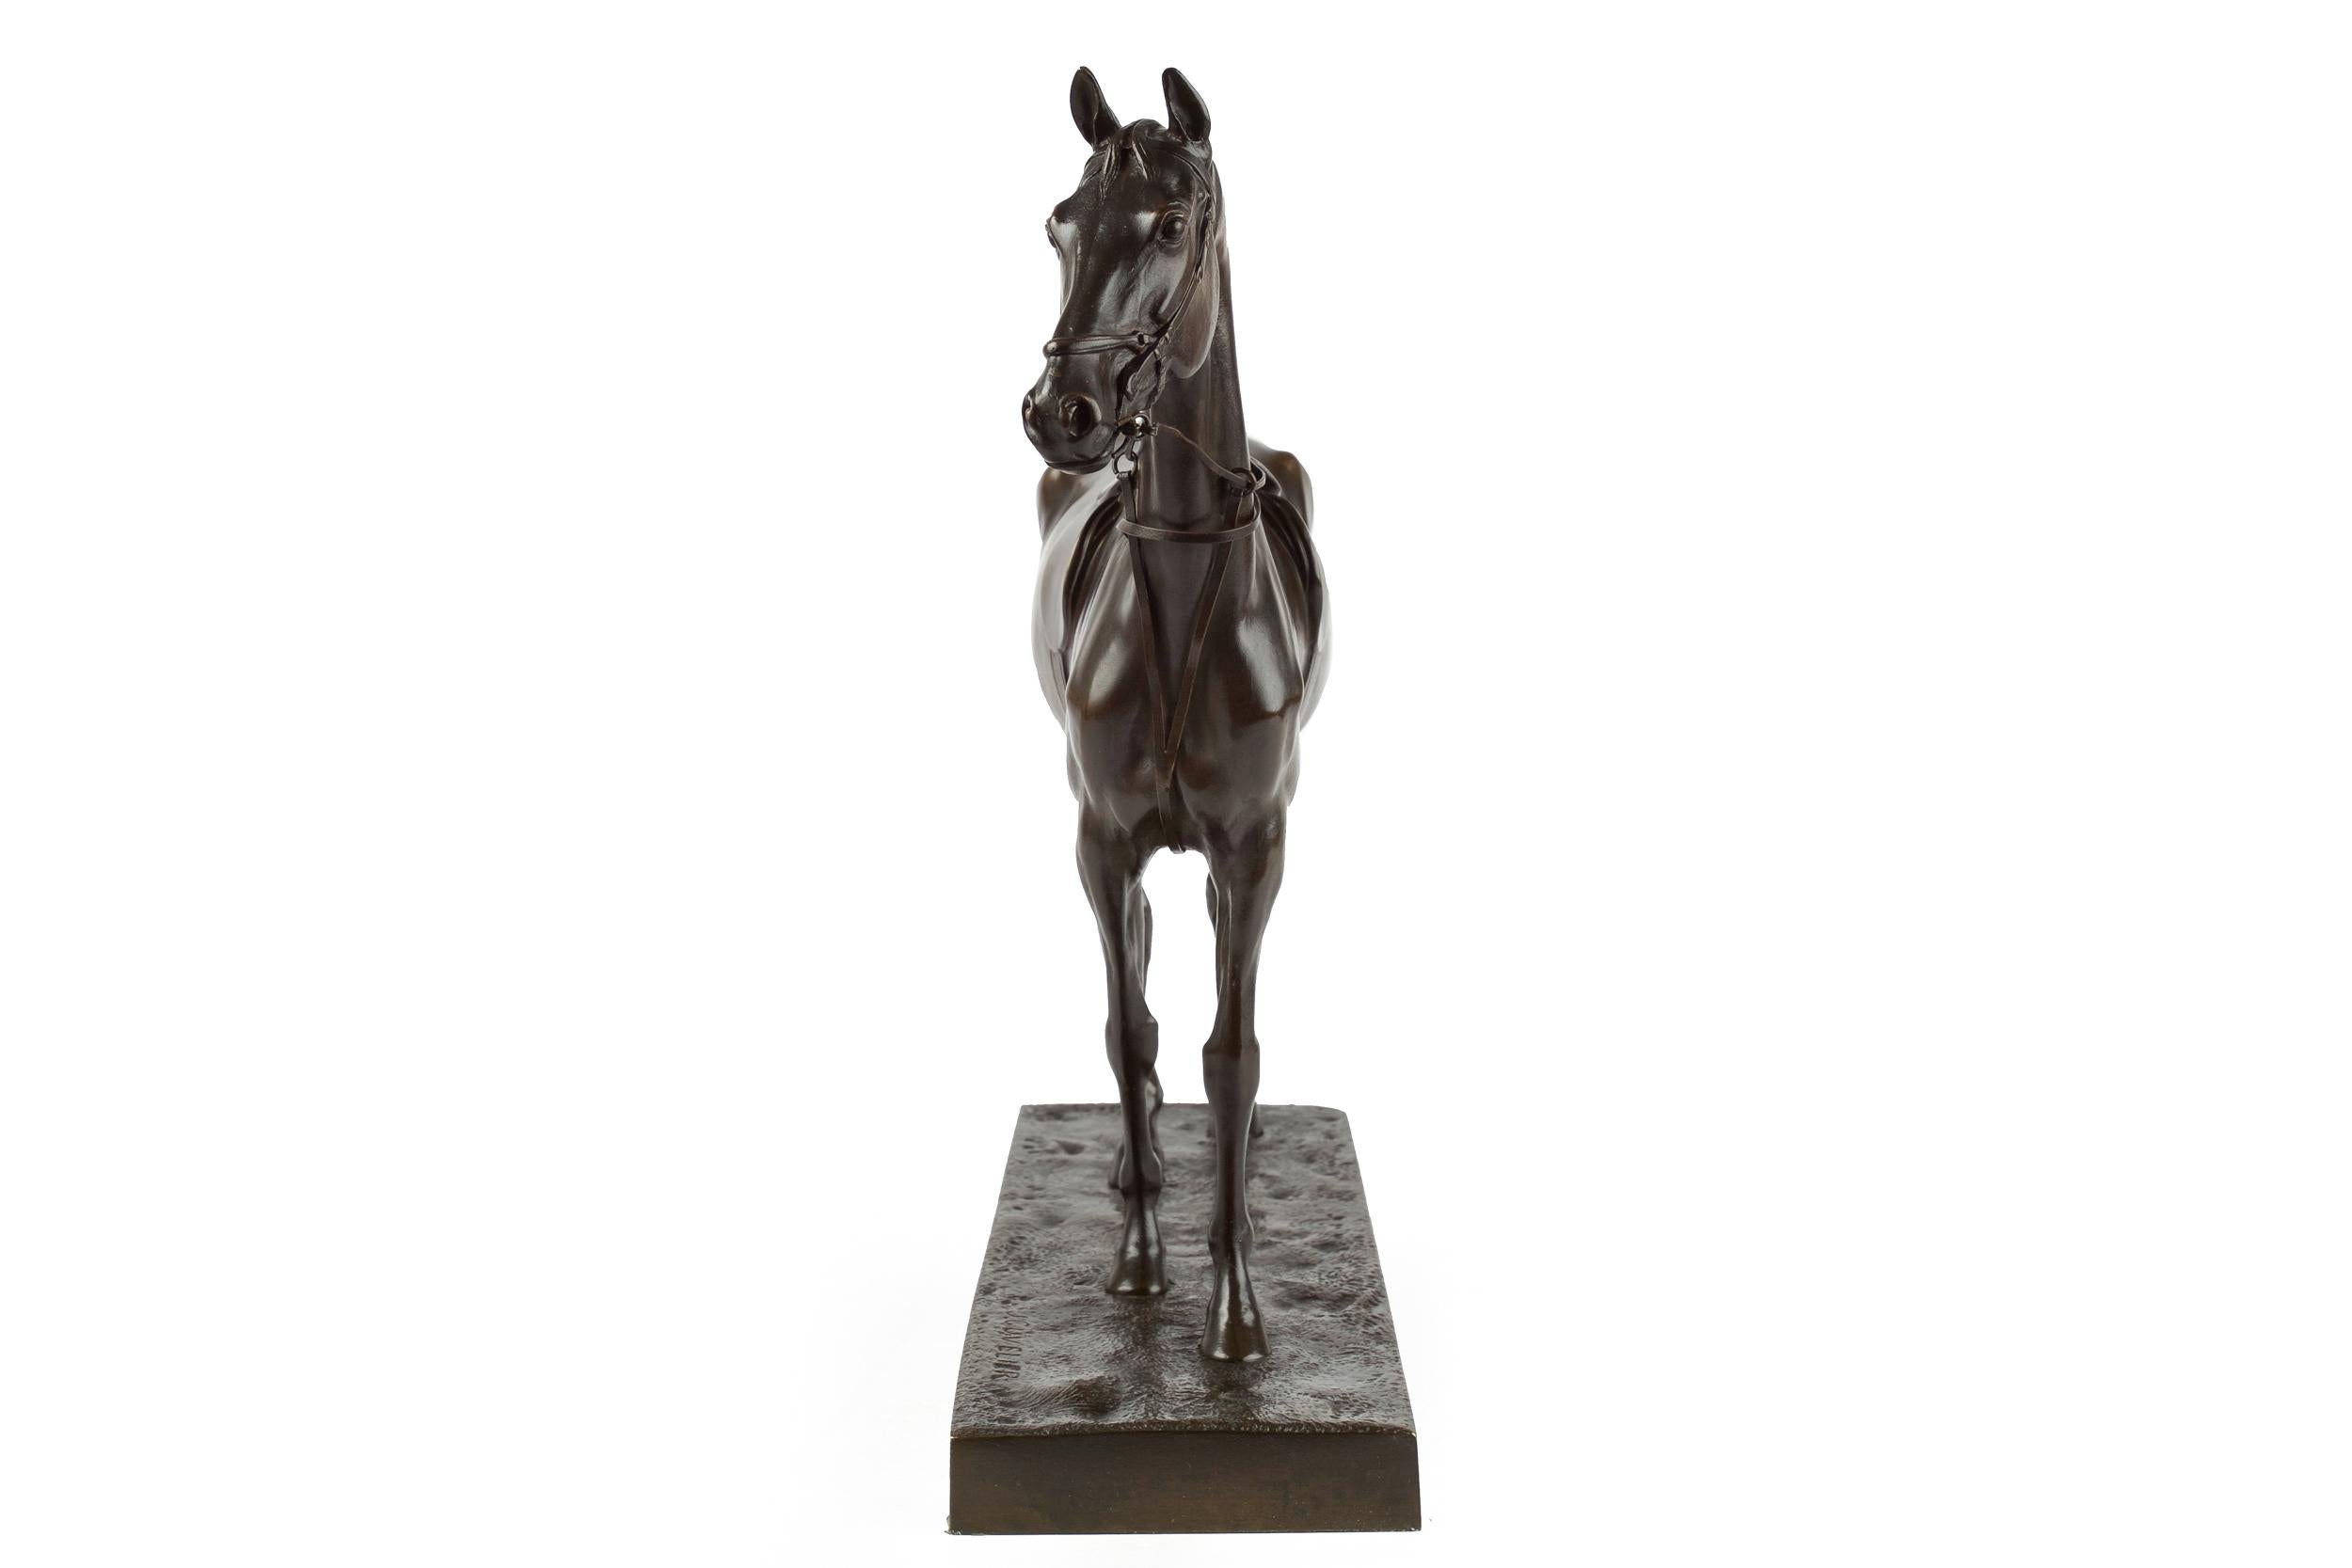 19th Century French Antique Equestrian Bronze Sculpture of Racehorse by Joseph Cuvelier